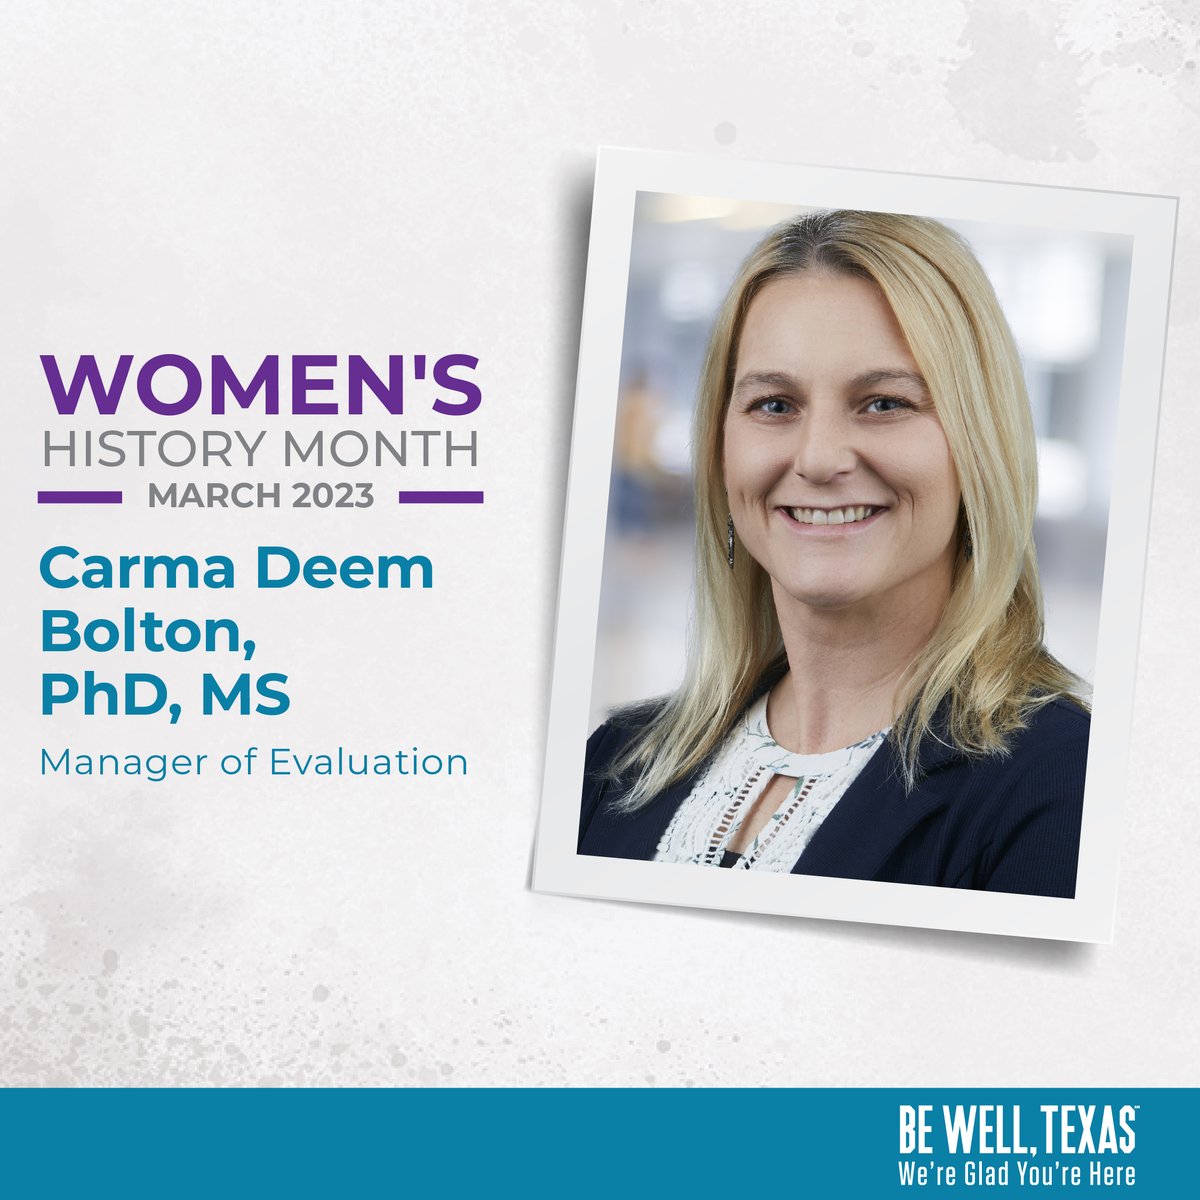 For #WomensHistoryMonth, we would like to highlight Dr. Deem Bolton! Dr. Deem Bolton is a community-focused leader who is committed to collaboration. She believes that research & education are essential to reduce substance use disorder-related deaths. Thank you for all you do! ❤️